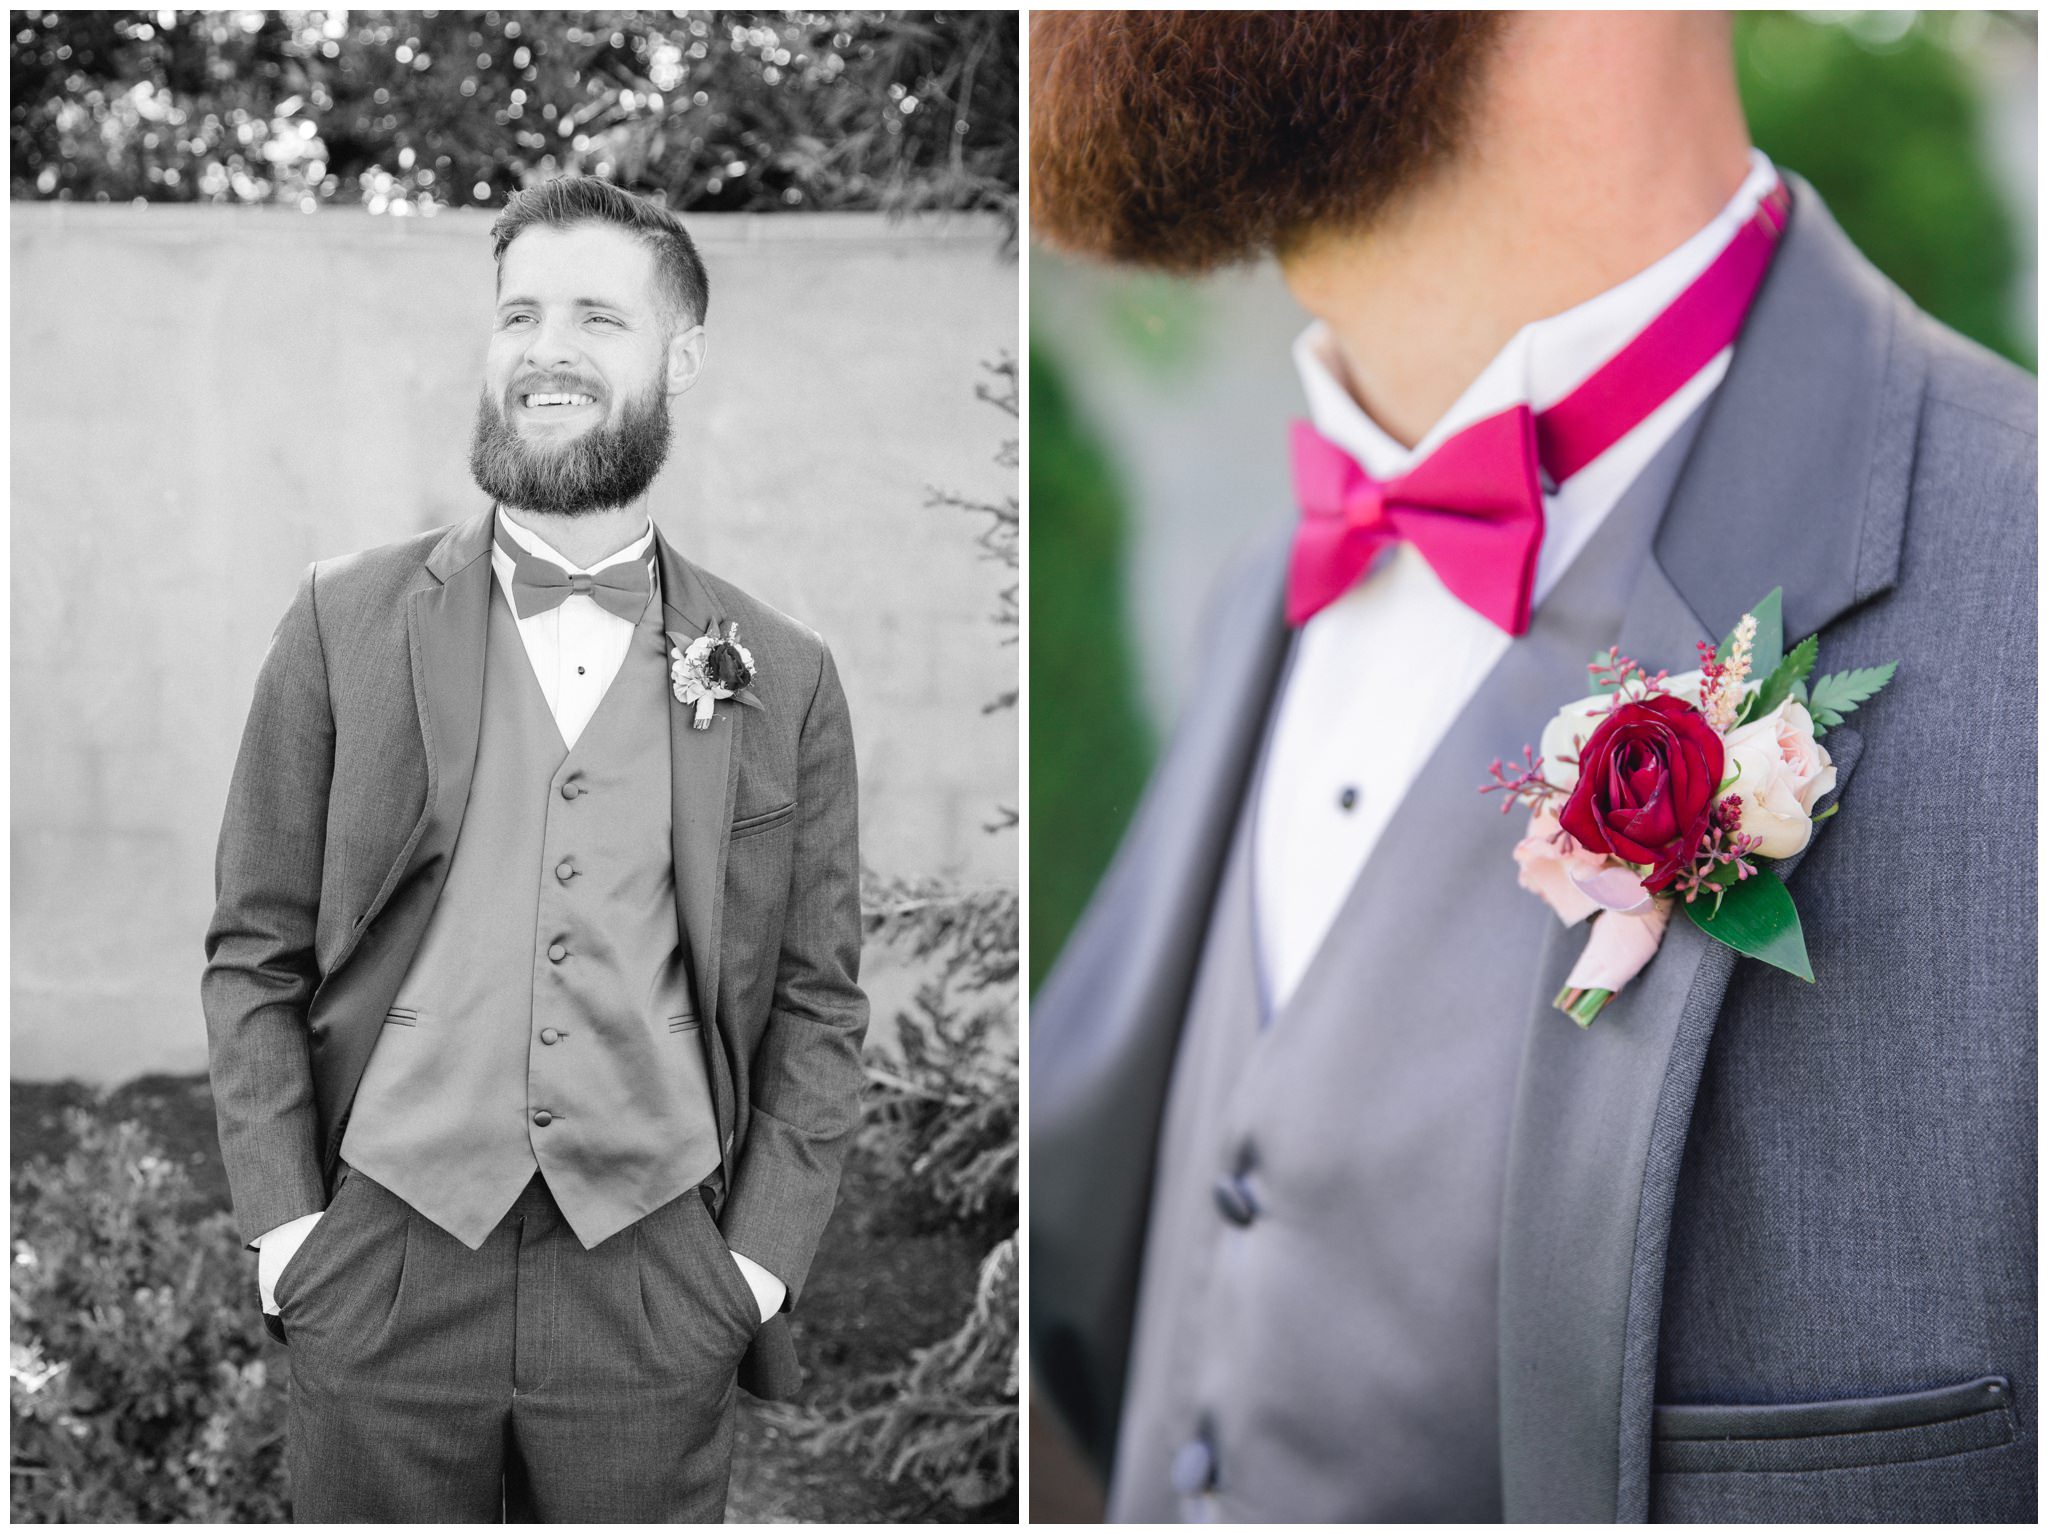 Groom pictures at detail images of his burgundy boutonniere by florist at the Wild Oak wedding Venue.